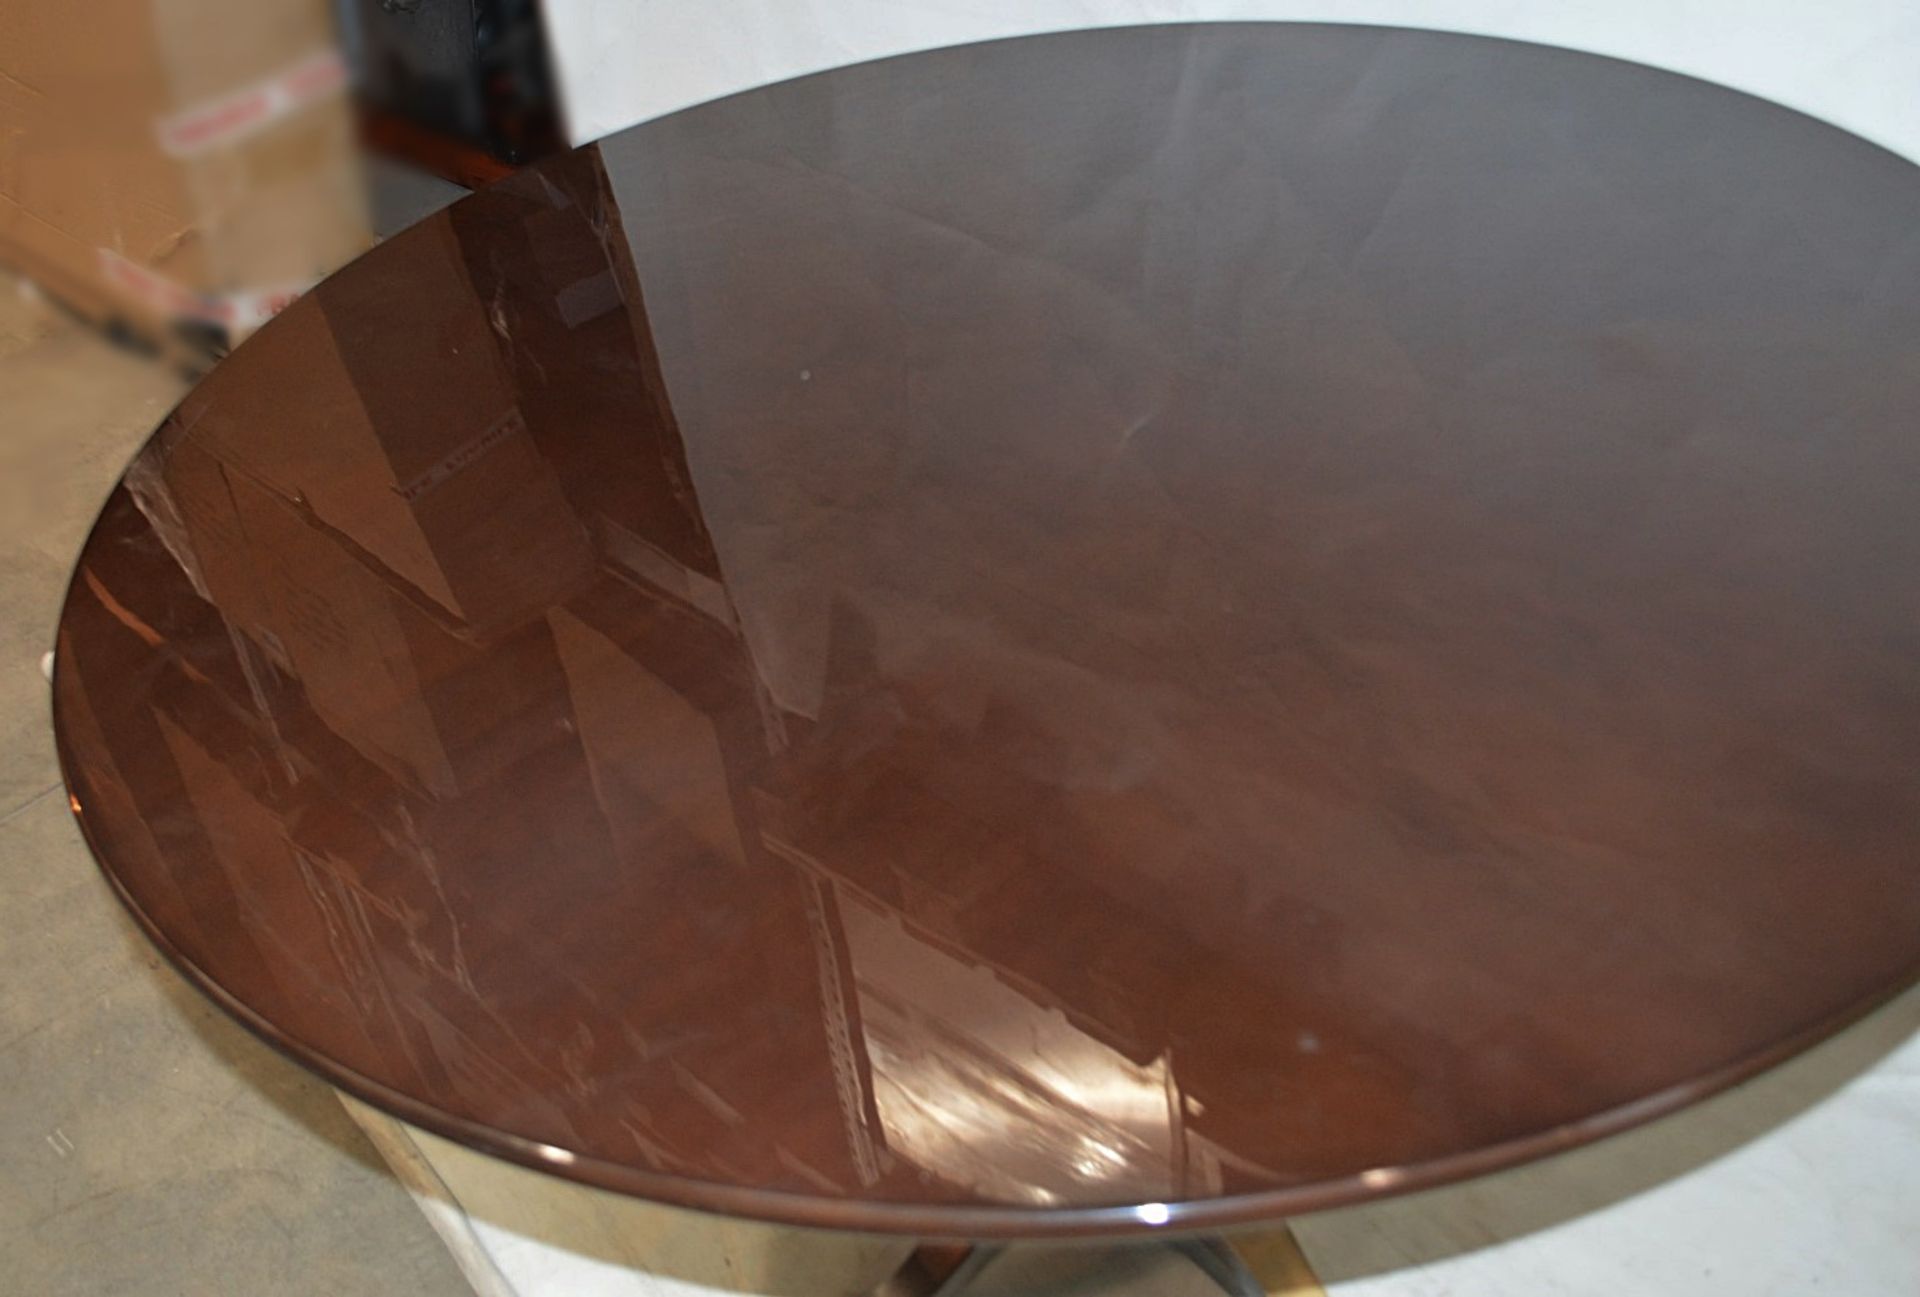 1 x Christopher Guy 'Toulouse' Round Georgian-Style Restaurant Dining Table - Original RRP £4,600.00 - Image 4 of 9